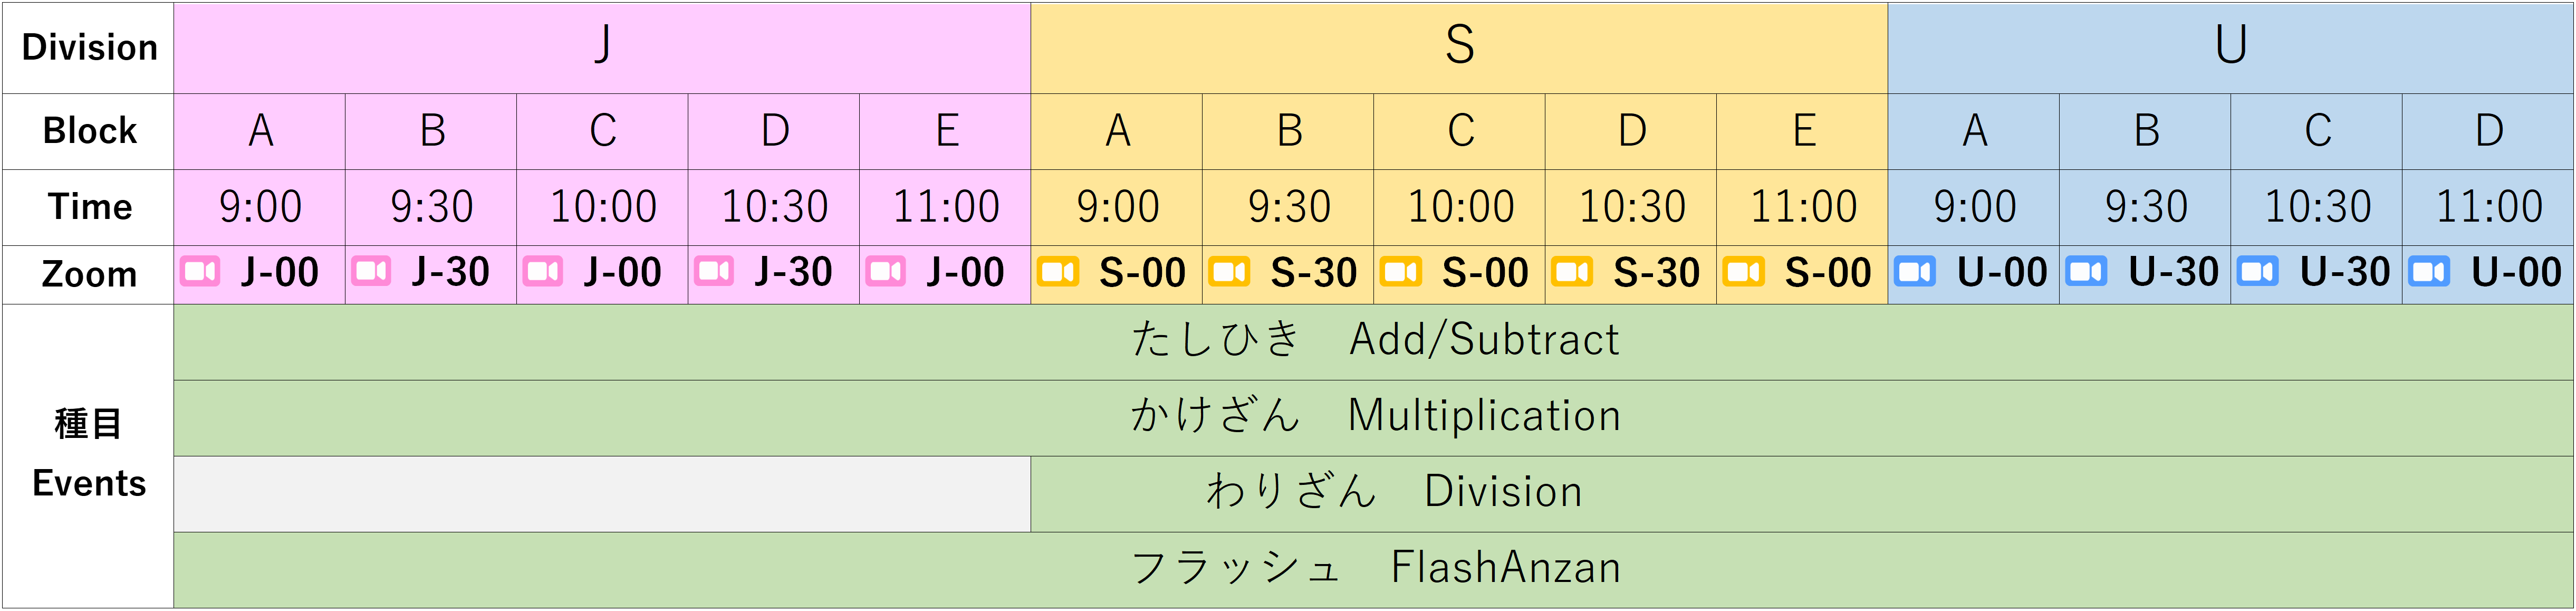 Individual Competition Timetable